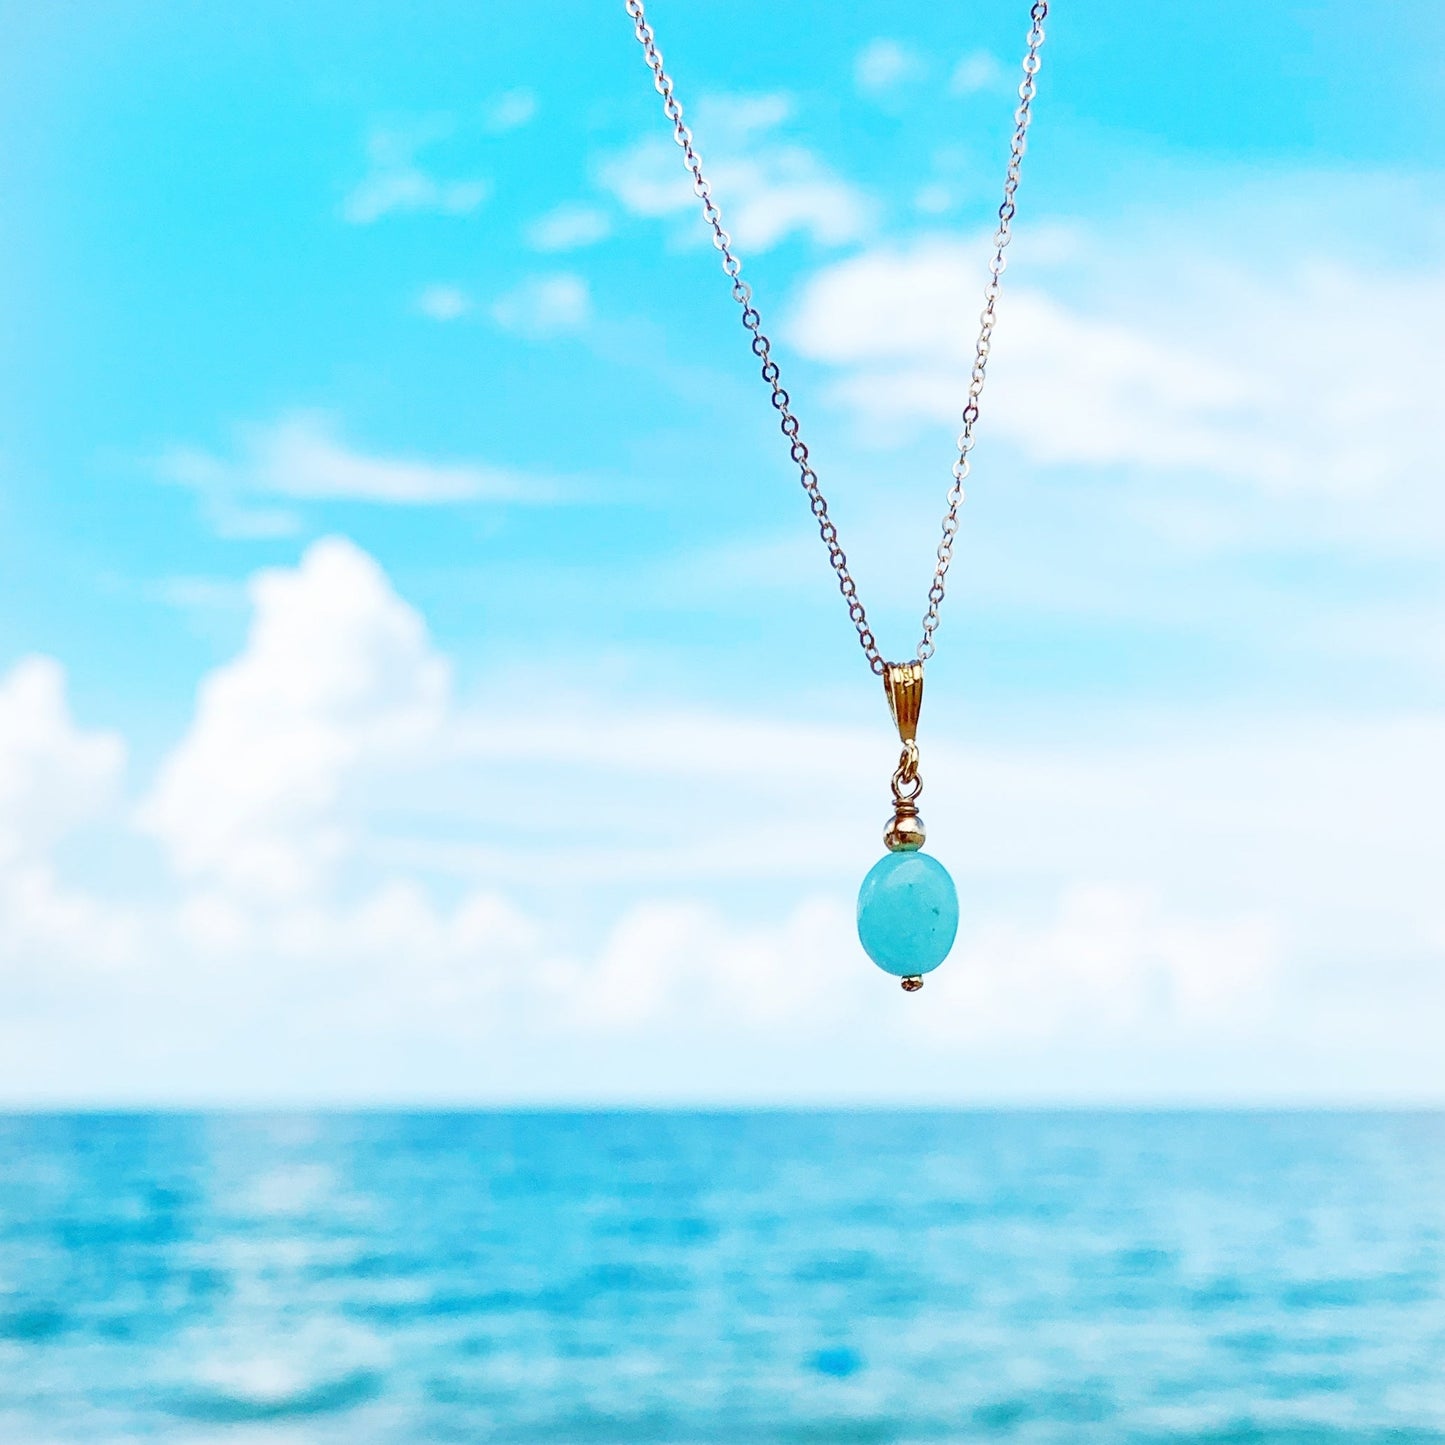 Laguna necklace by mermaids and madeleines is created with an aqua color amazonite oval stone and  hangs from a 14k gold filled chain. this necklace is pictured suspenced over a blue sky and beachy background